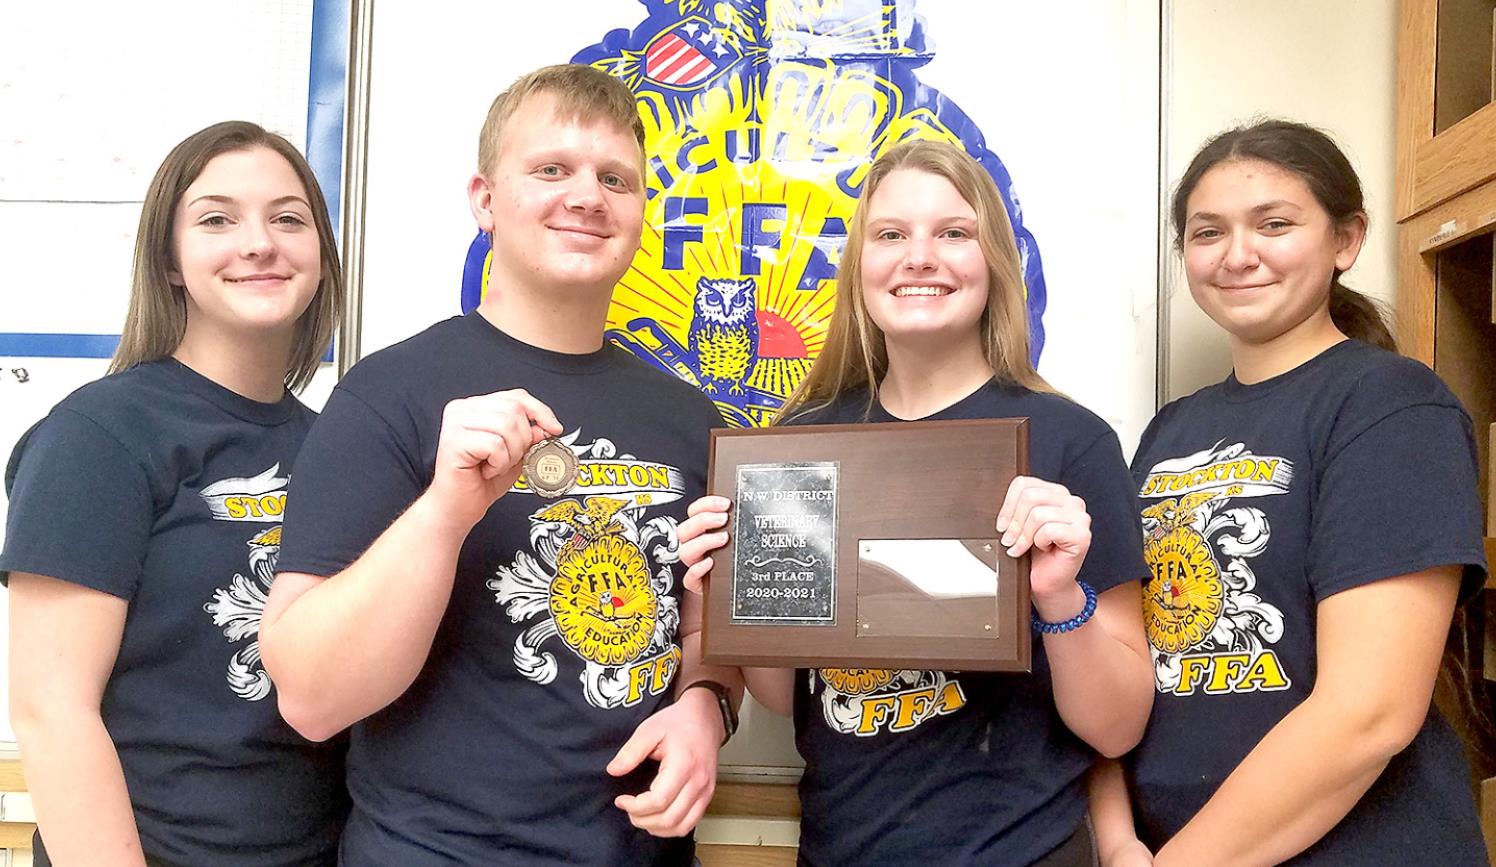 THE STOCKTON FFA SENIOR TEAM of (from left) Coryn Hahn, Kaden Kriley, Jolee Sterling and Raven Long placed third in their division, with Kaden Kriley placing 11th individually.